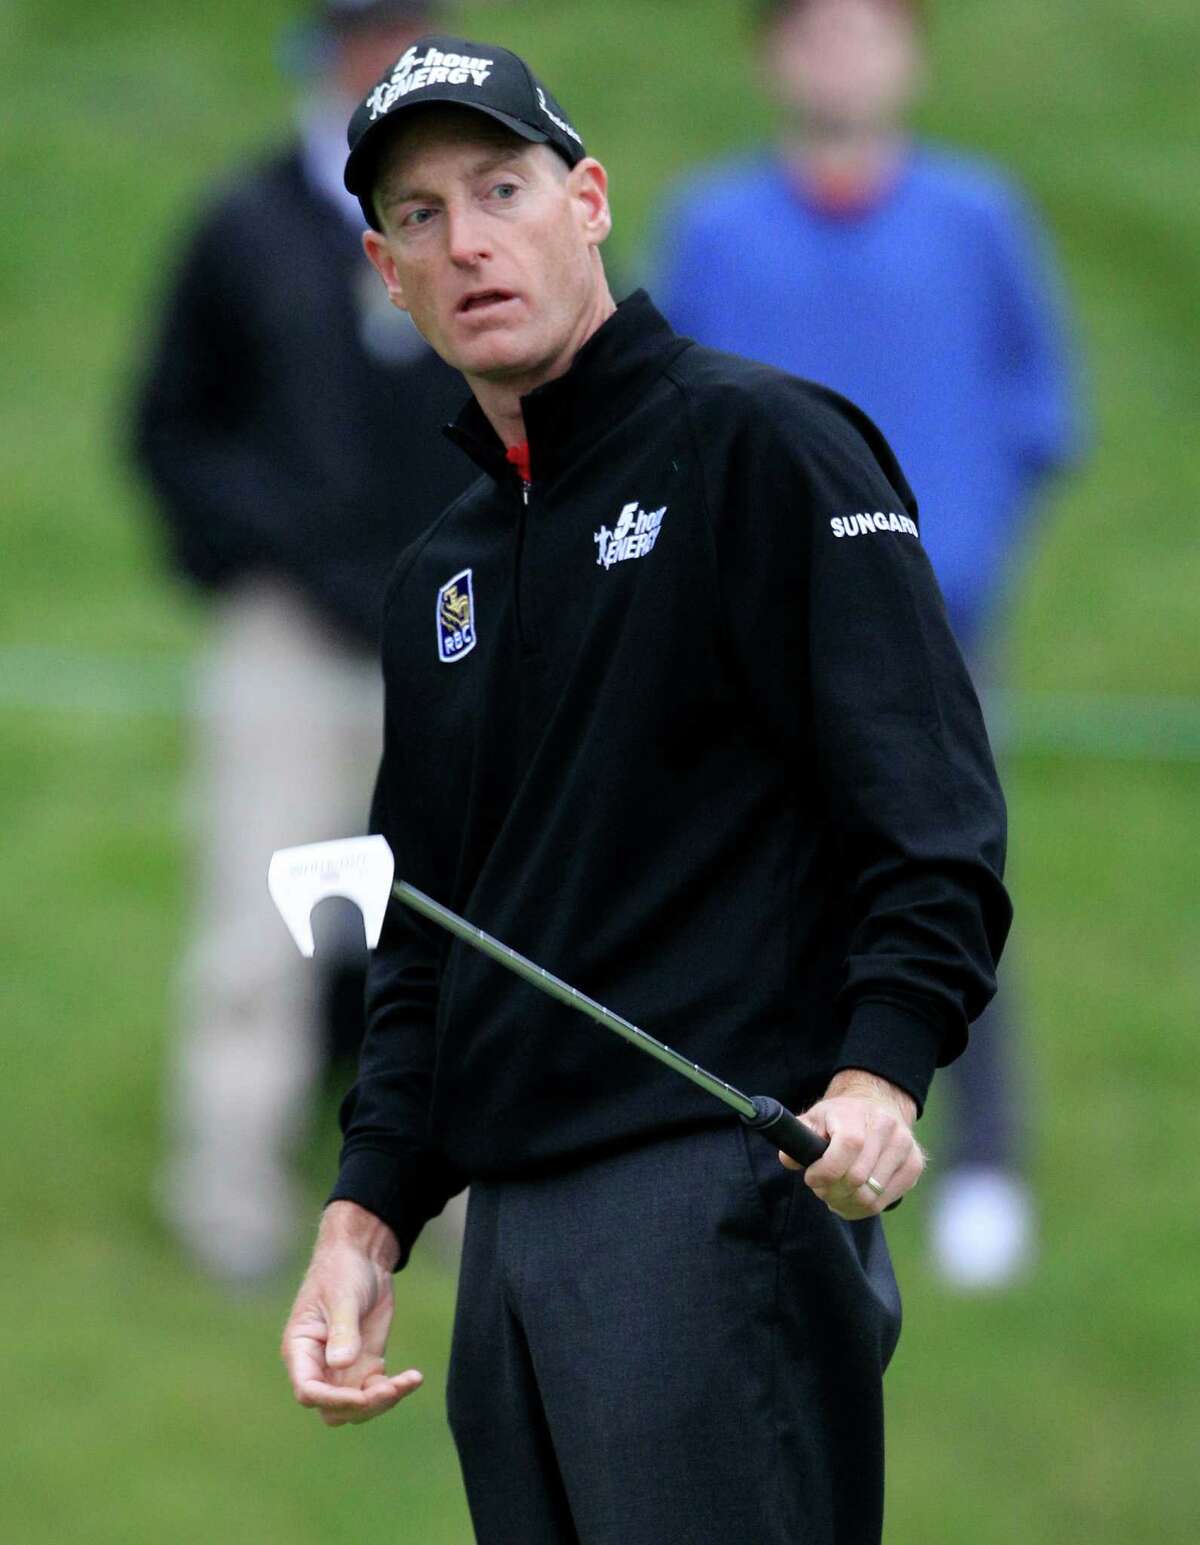 Jim Furyk reacts after missing a birdie putt on the 12th hole during the second round of the Memorial golf tournament at the Muirfield Village Golf Club in Dublin, Ohio, Friday, June 1, 2012. Furyk parred the hole. (AP Photo/Tony Dejak)